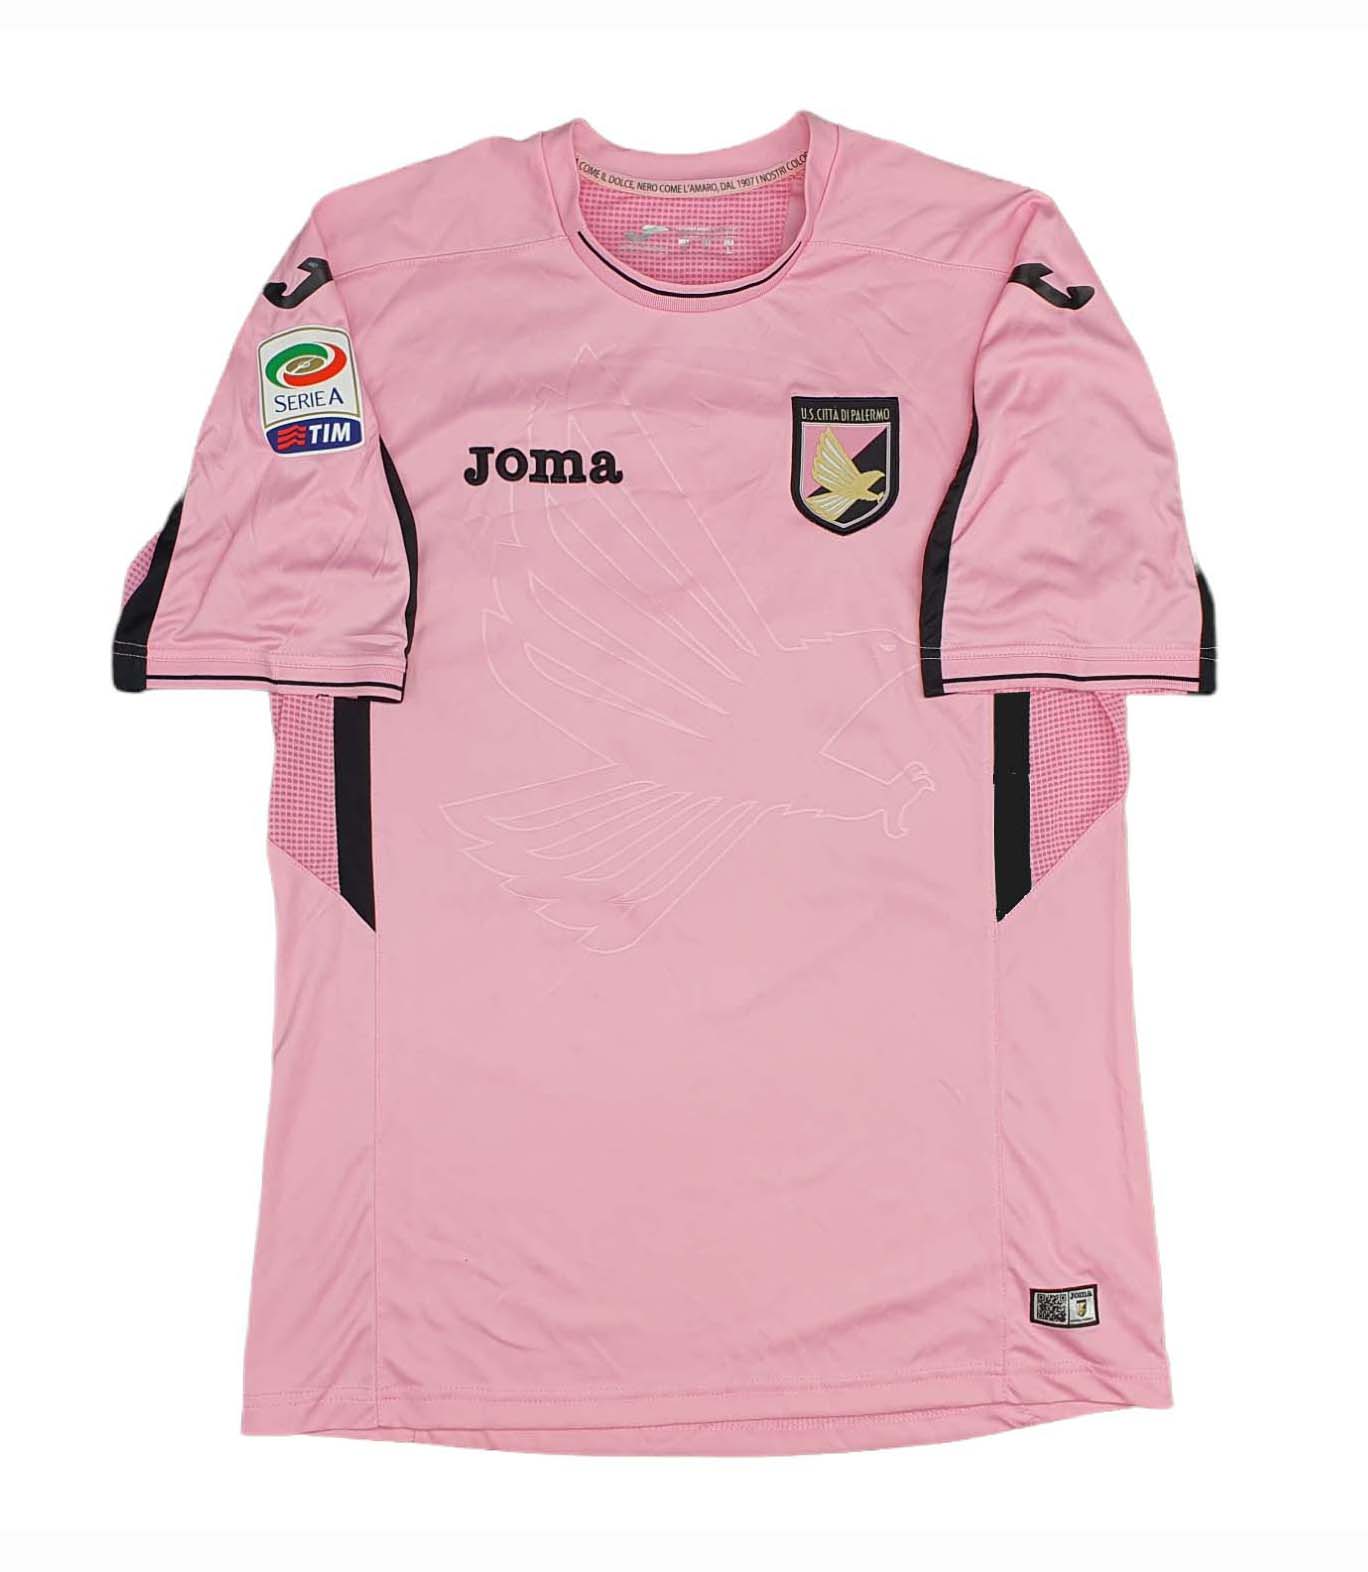 Joma Palermo Home 2015 Jersey